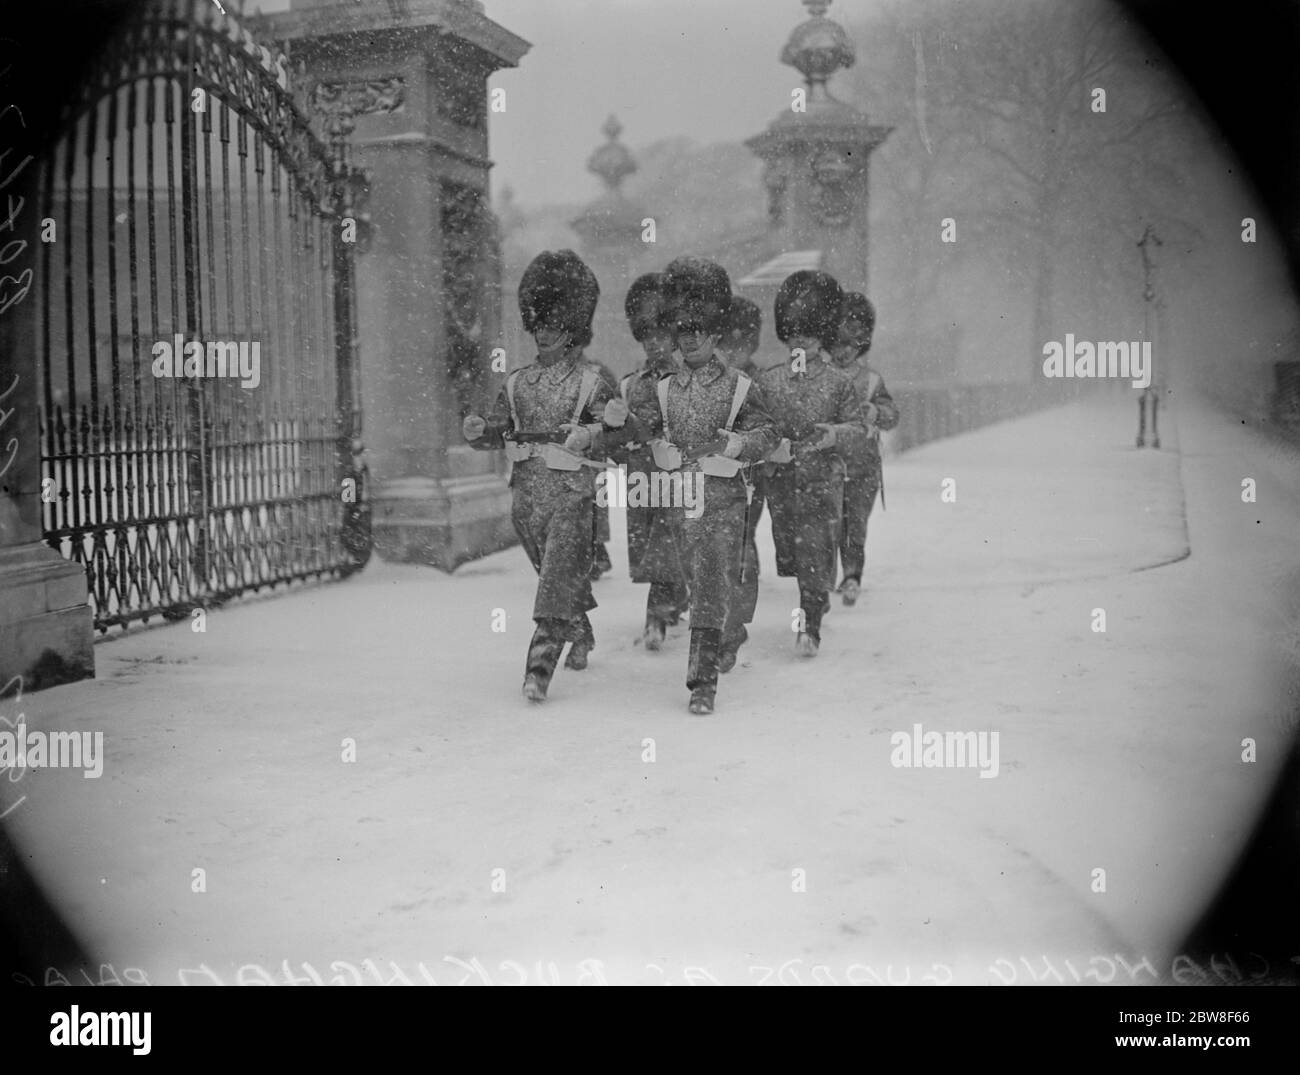 Real wintry weather in London . A scene outside Buckingham Palace during the changing of the guards showing guardsmen marching in the furry snow . 10 February 1932 Stock Photo